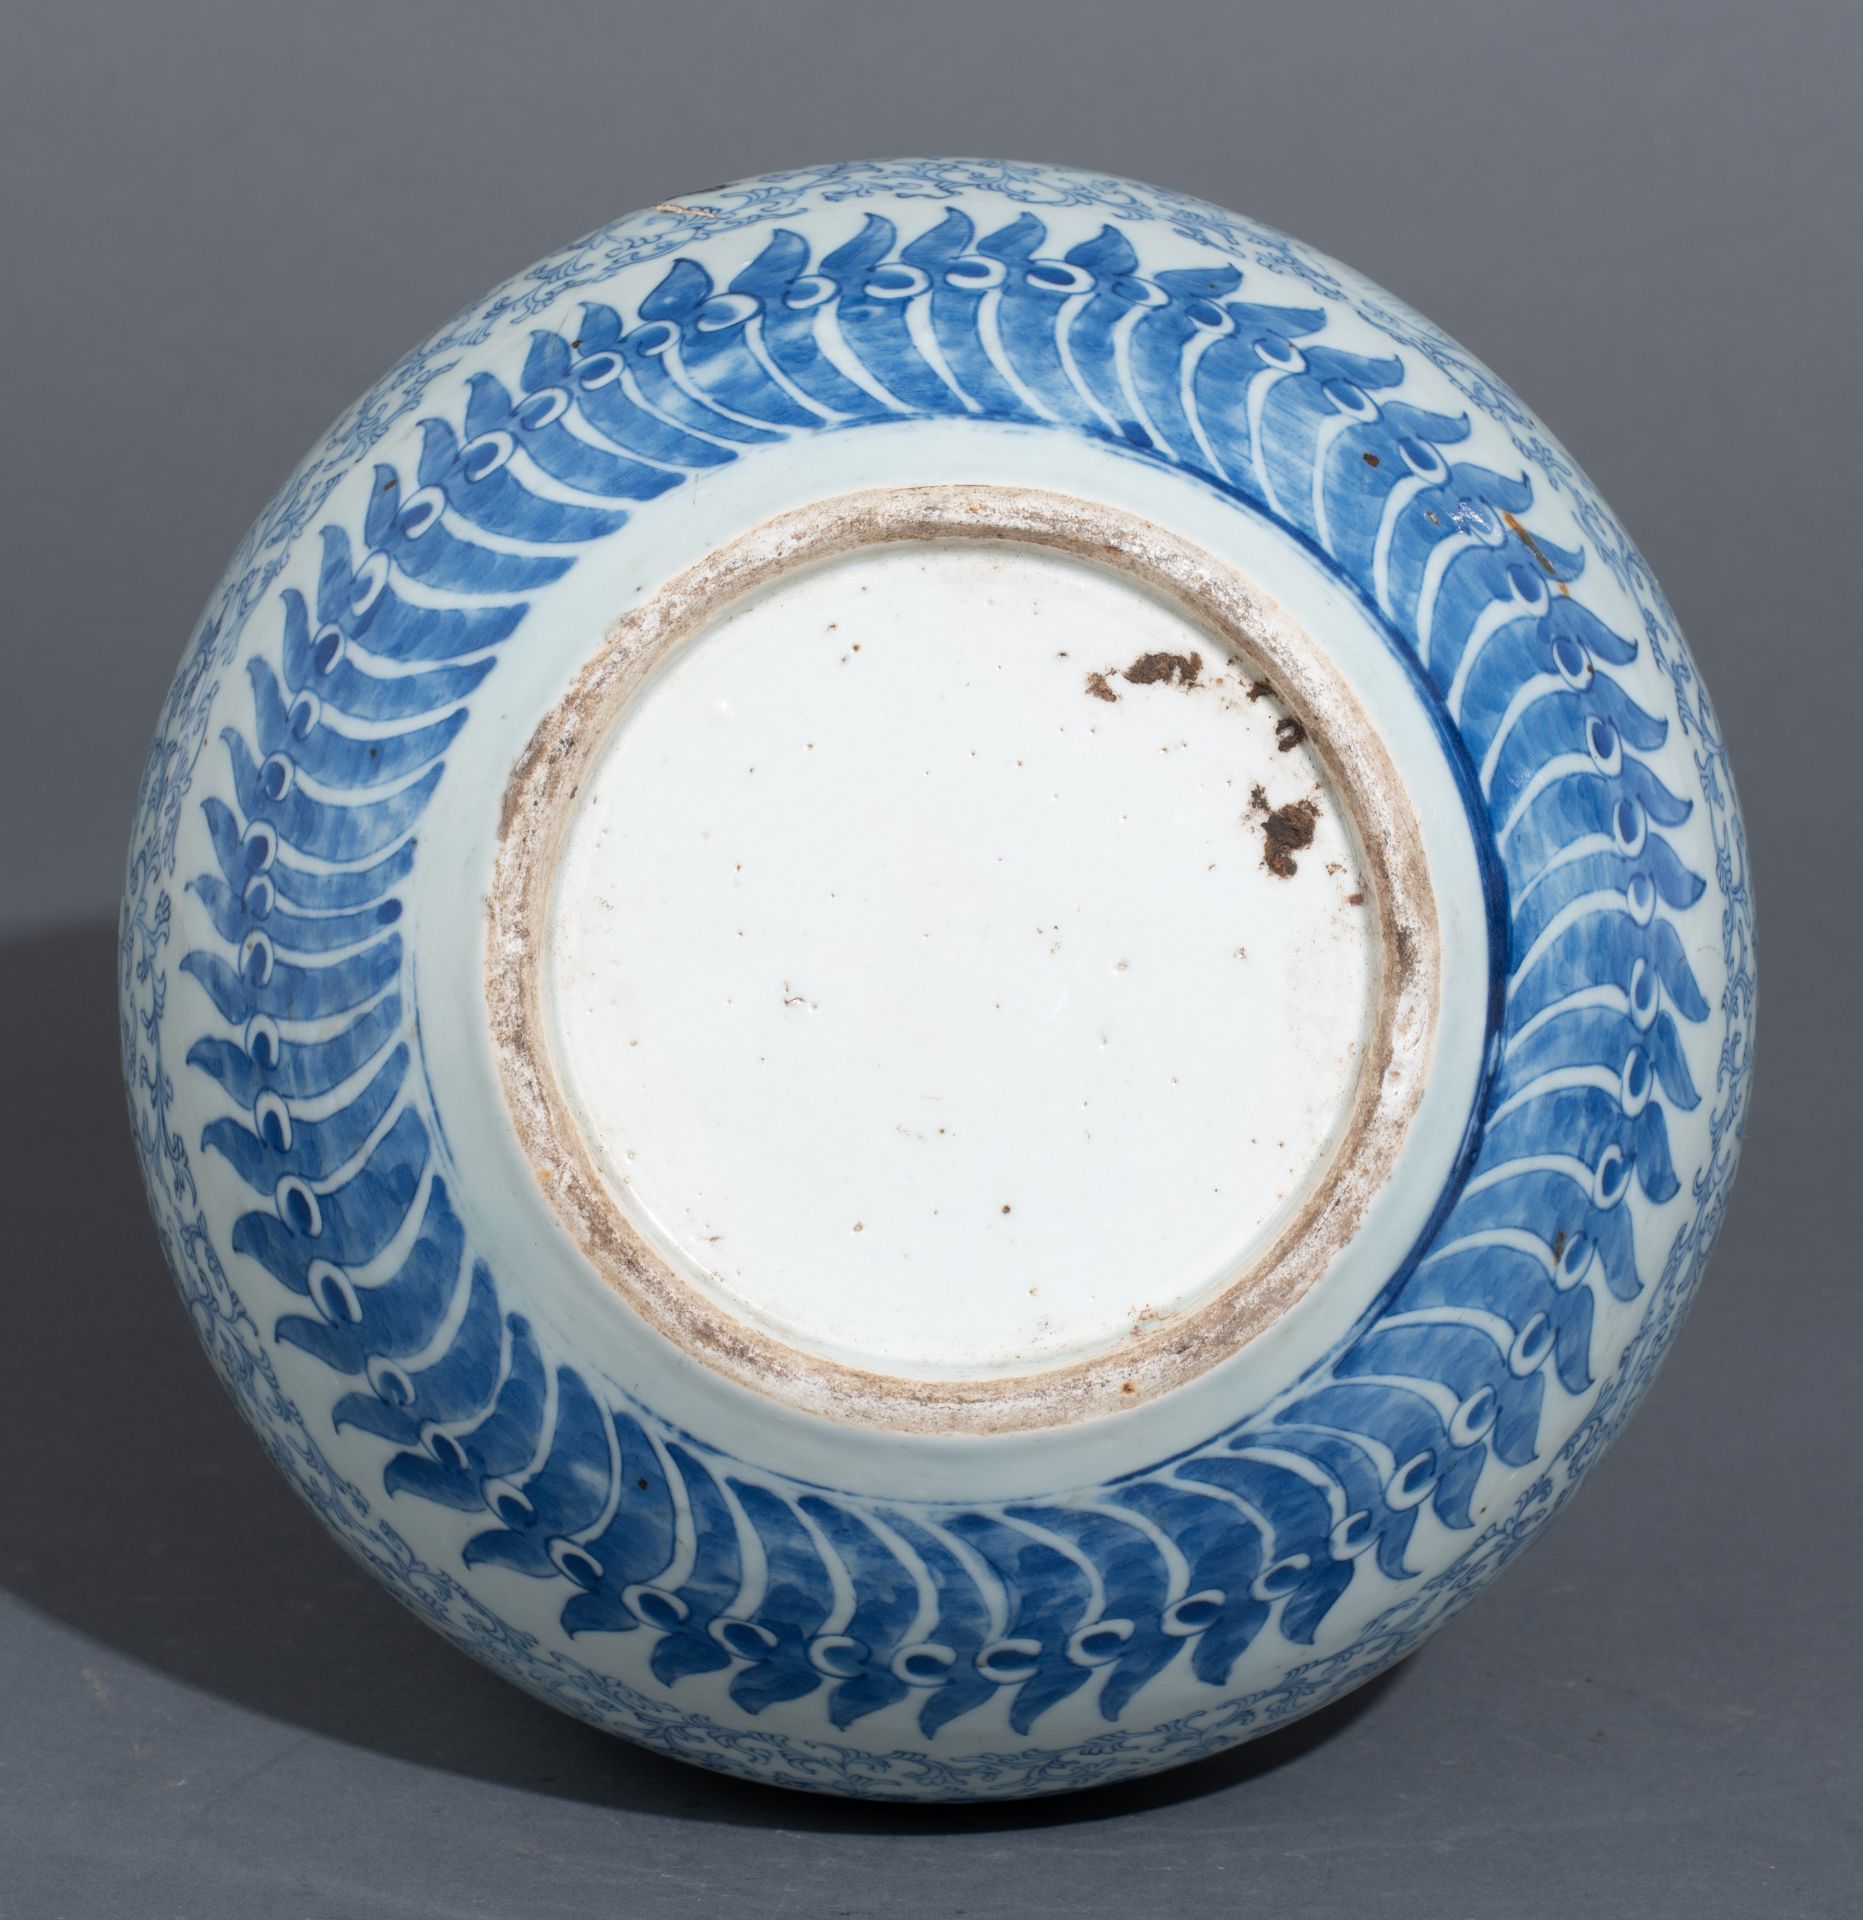 A Chinese blue and white 'Double Xi-sign' bottle vase, early 20thC, H 41 cm - Image 5 of 6